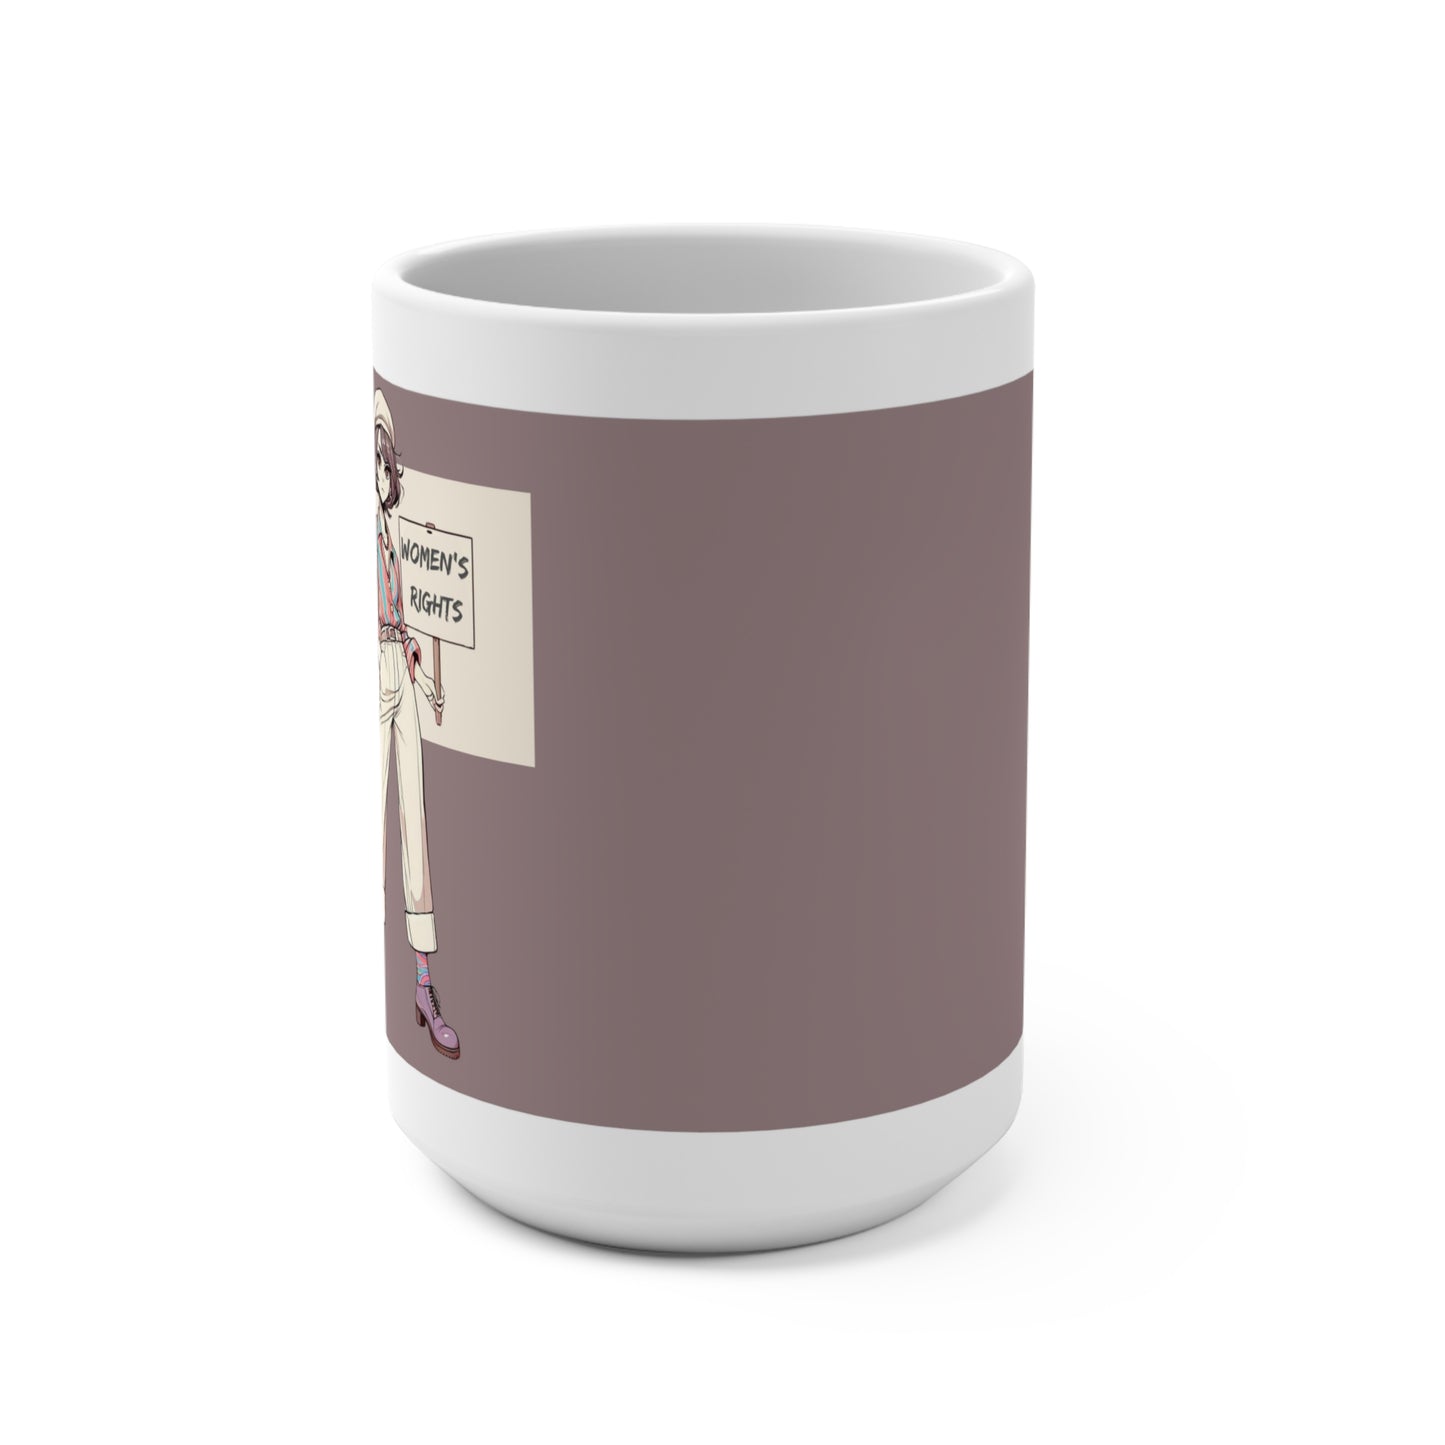 Women's Rights! Inspirational Statement Coffee Mug (15oz): Demand to be heard, Protest Oppression, Demand Equality!